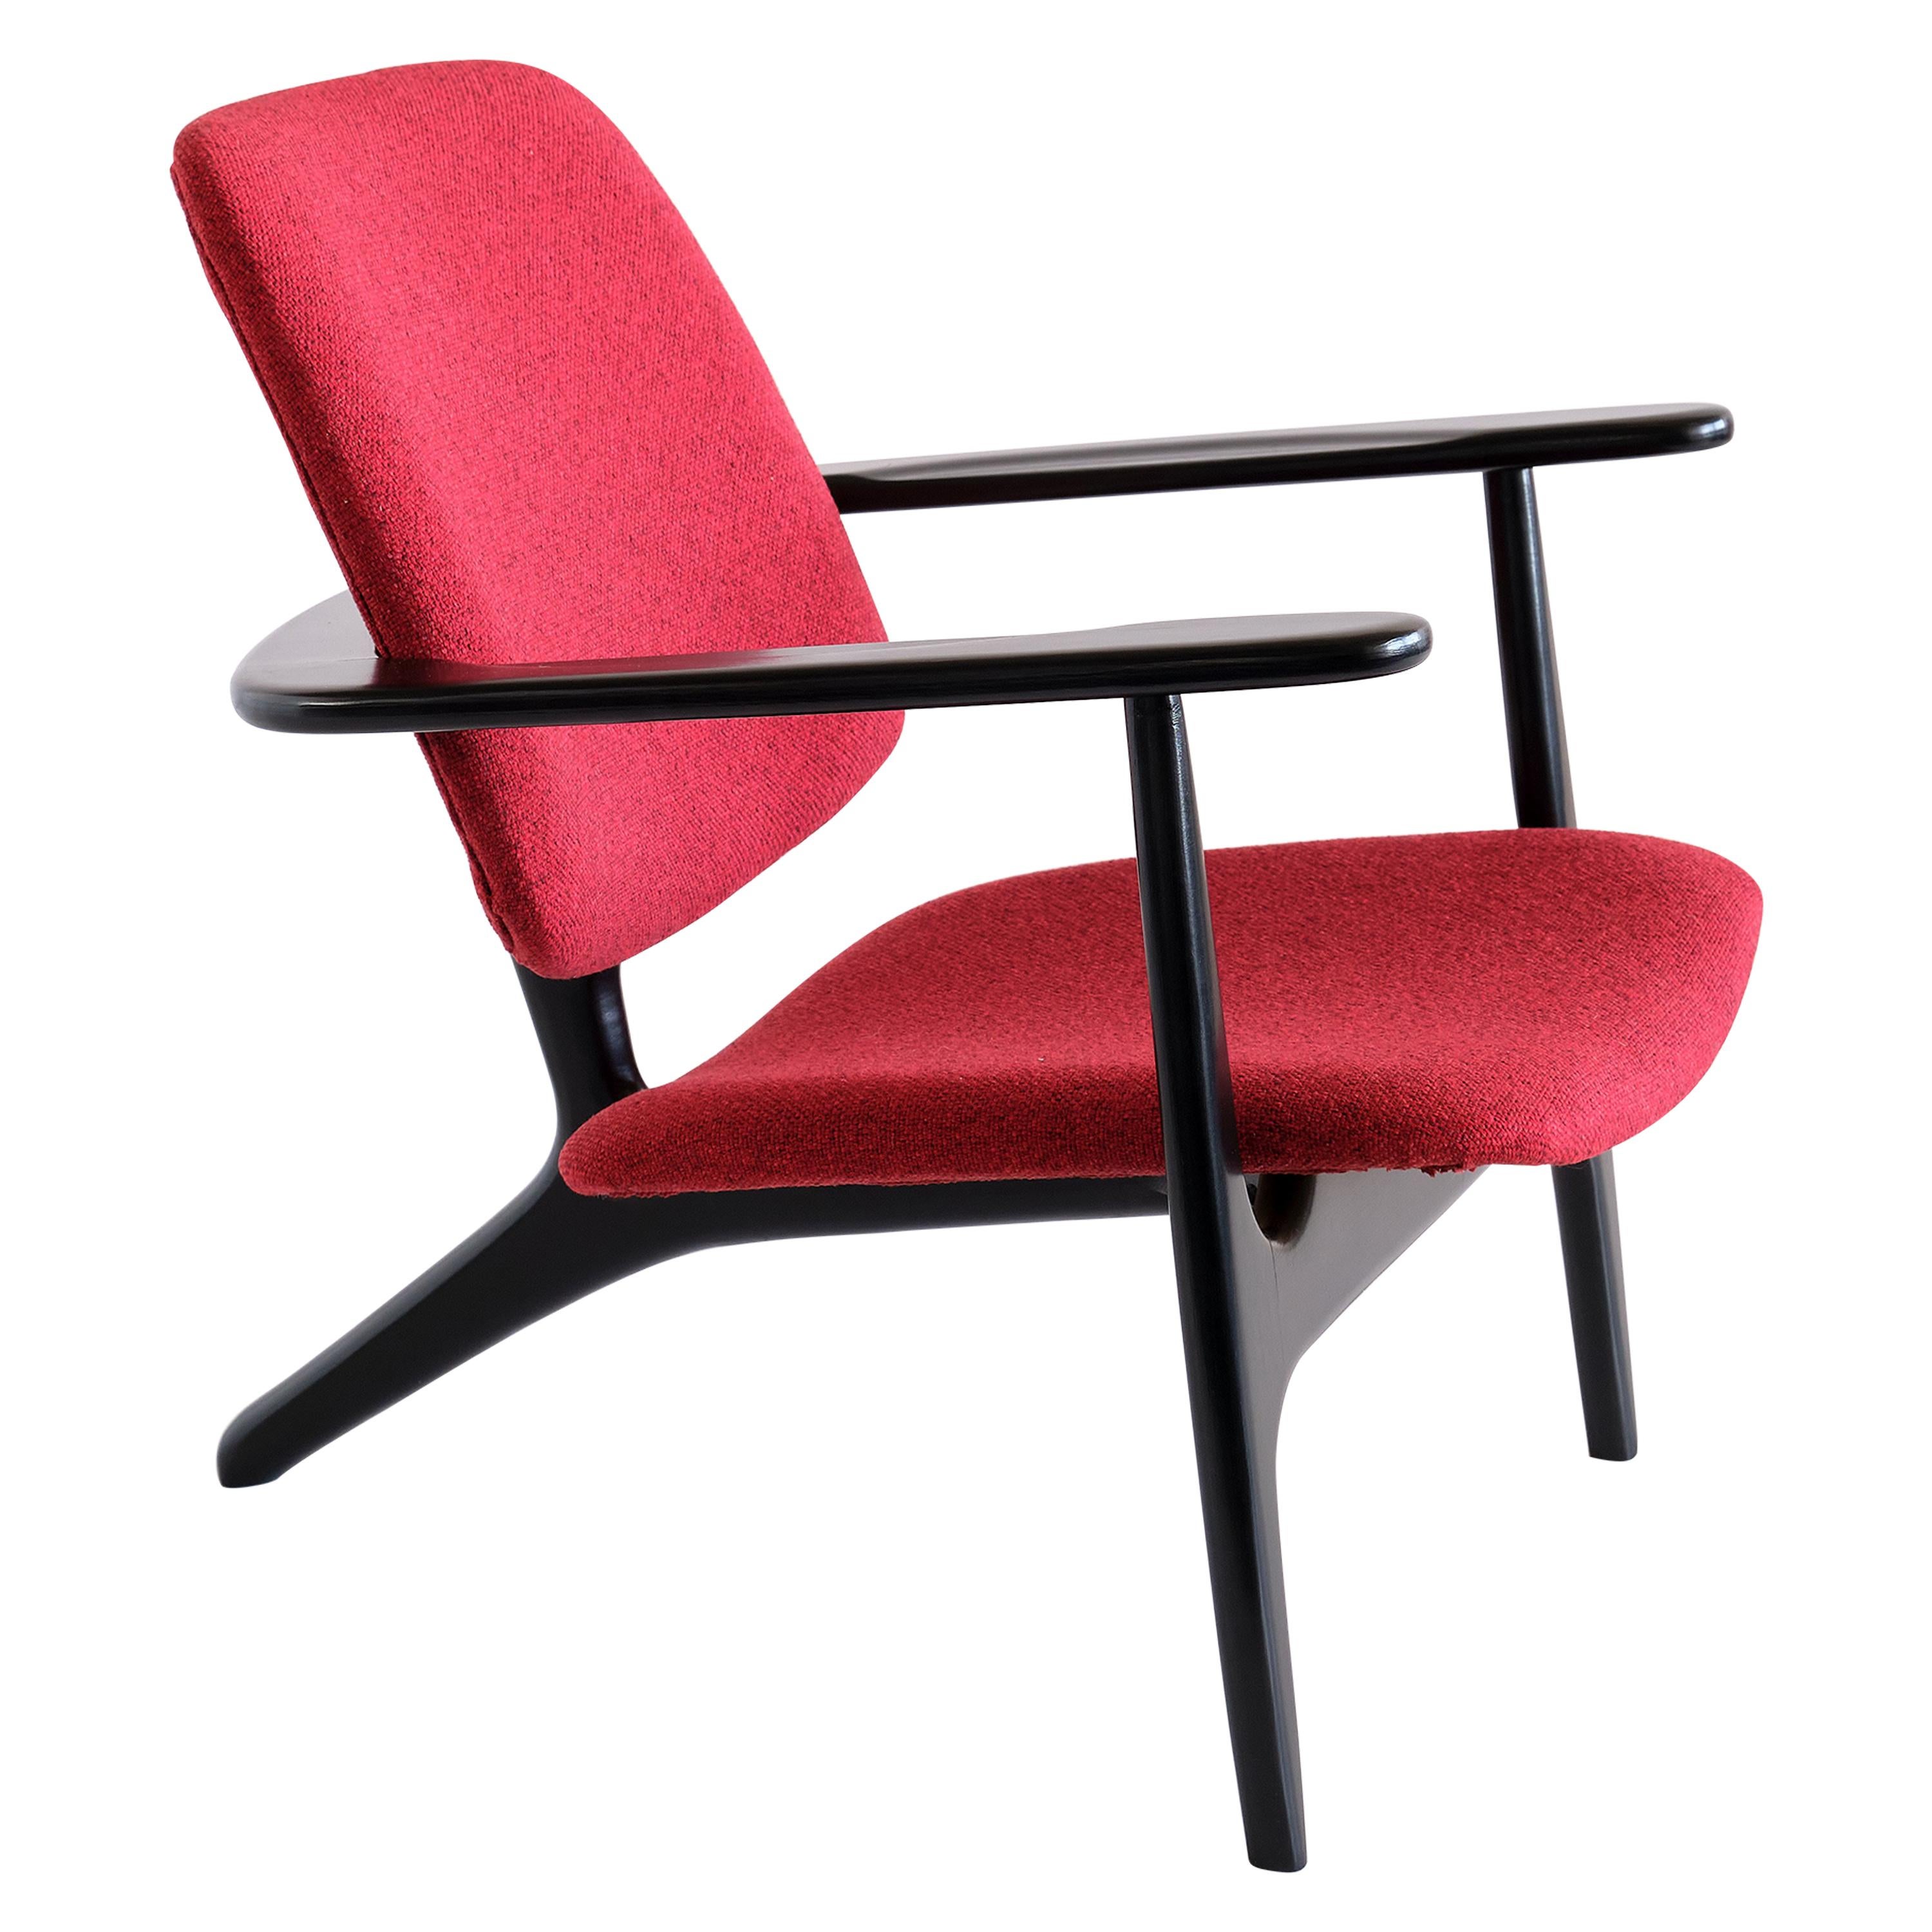 Alfred Hendrickx S3 Armchair Designed for Sabena Airlines, Belgium, 1958 For Sale